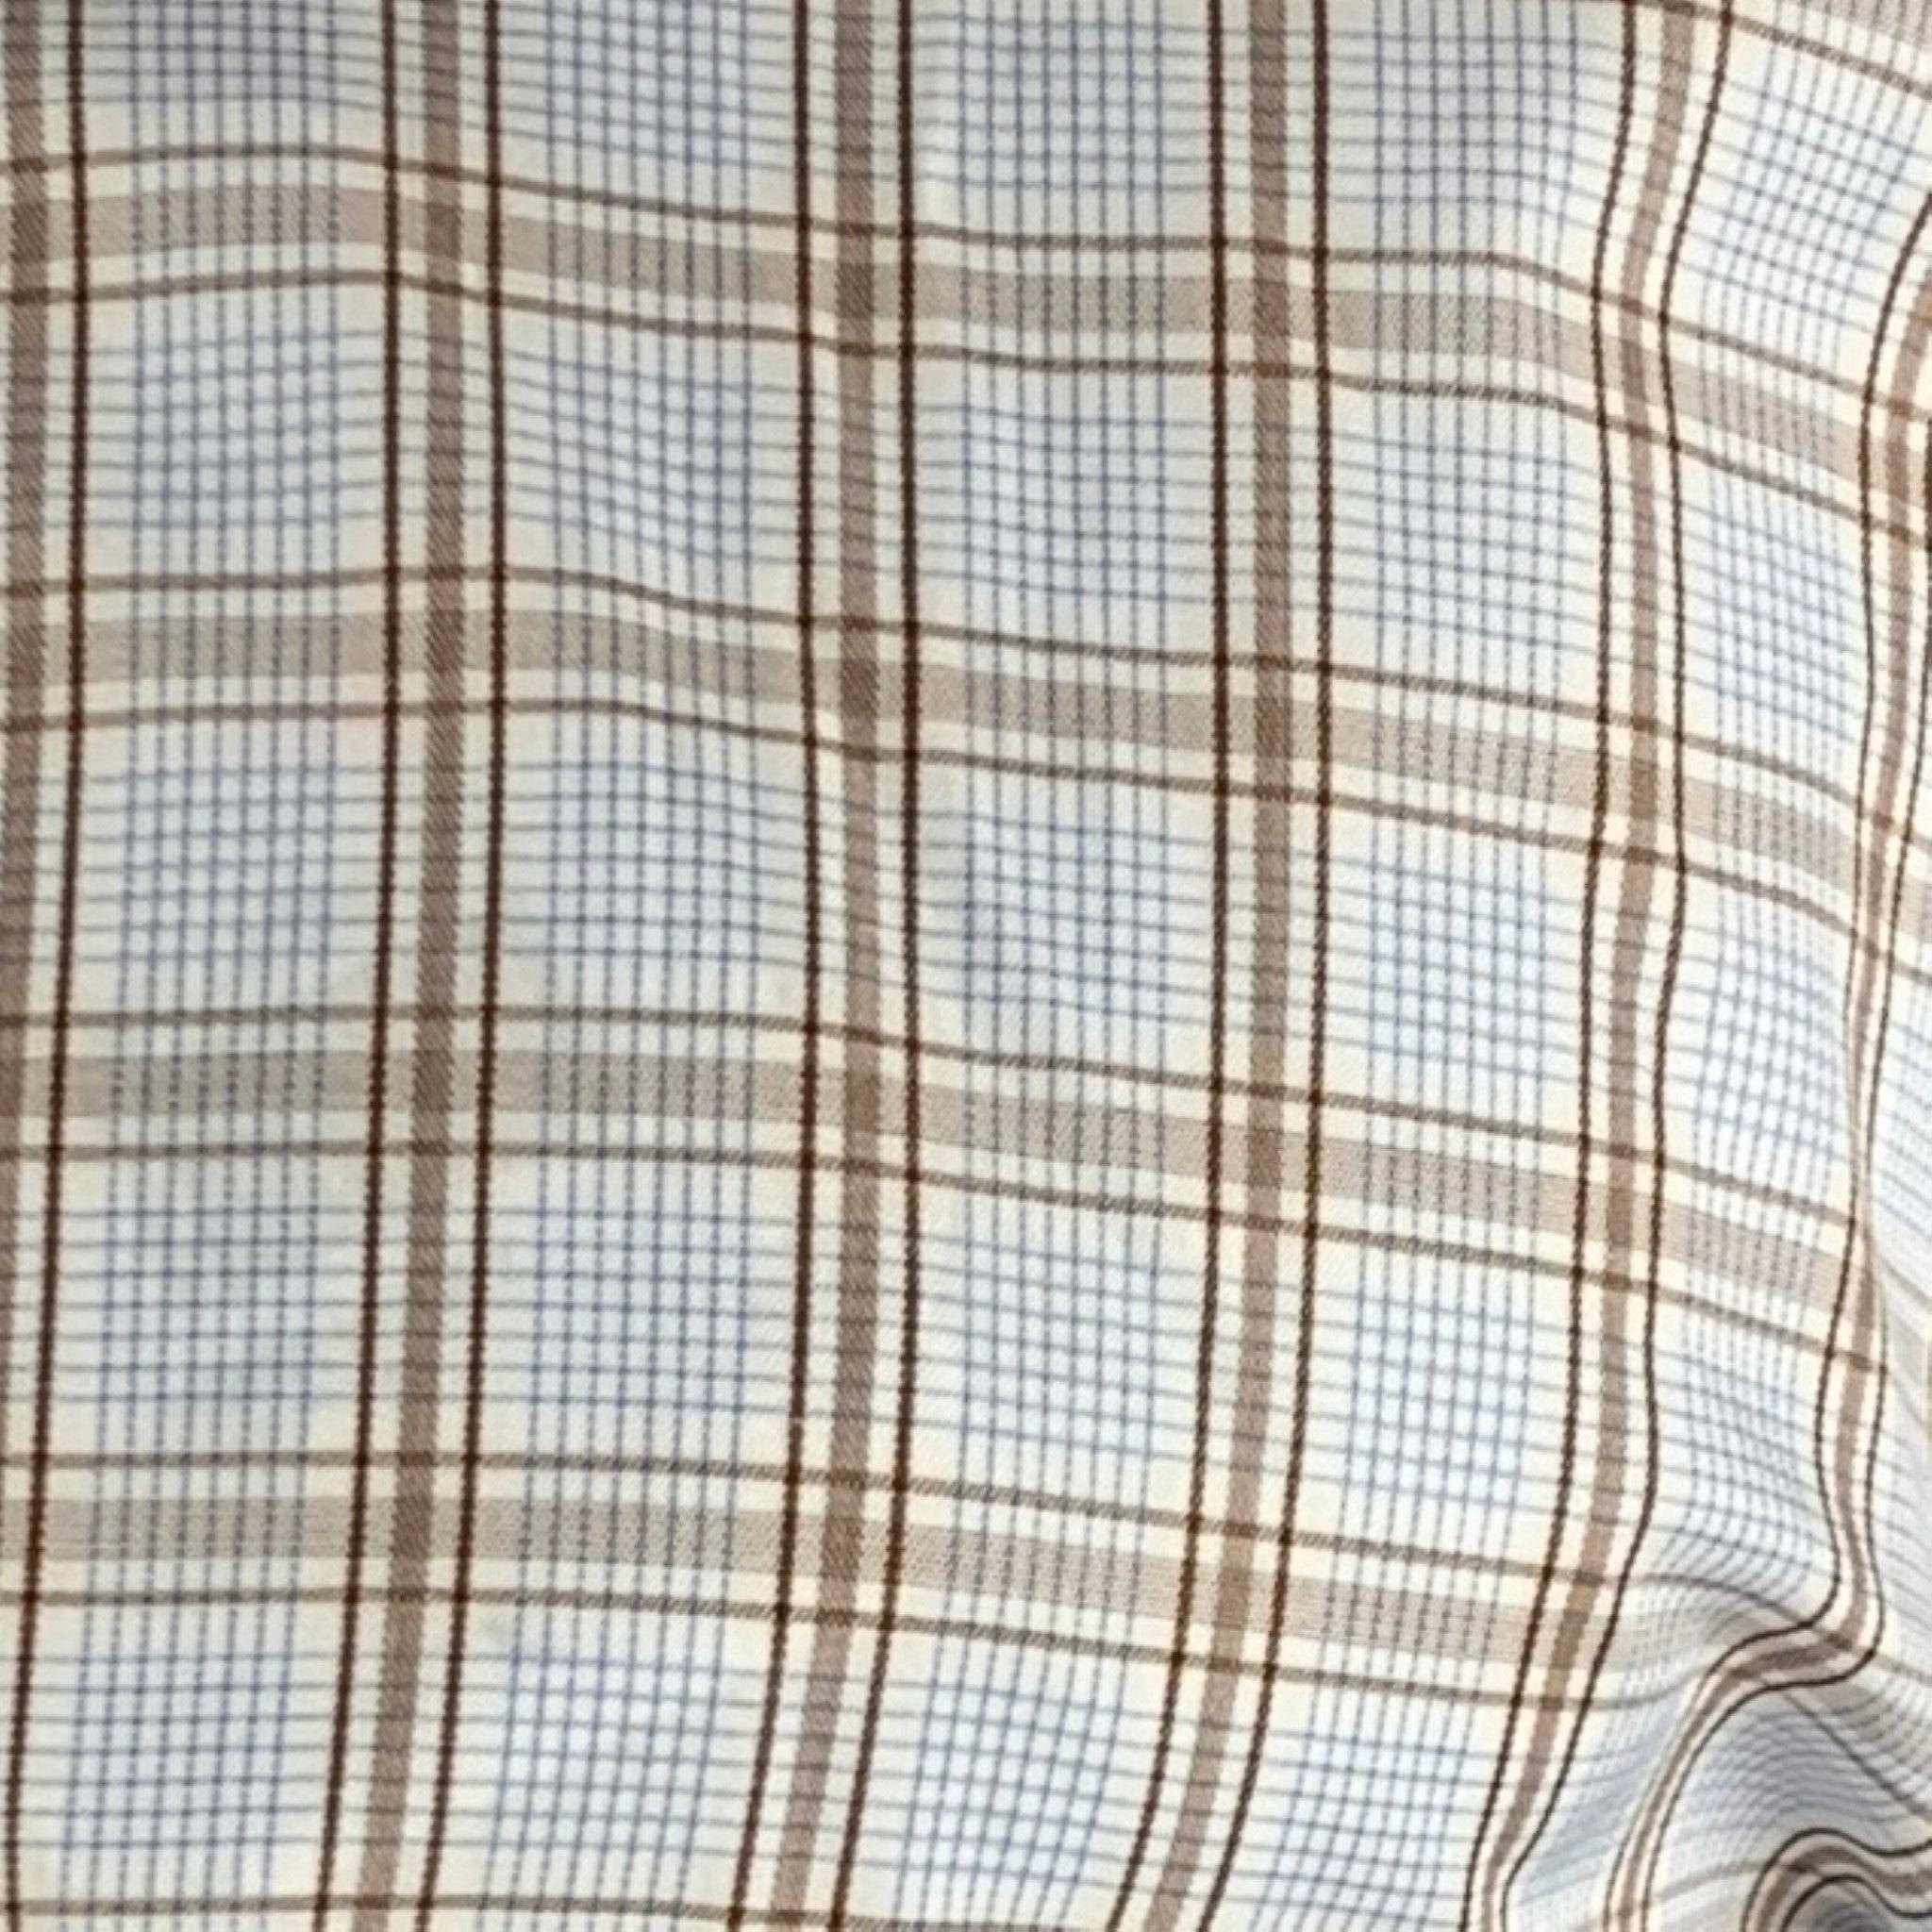 ISAIA long sleeve shirt in a white cotton fabric, featuring a blue and brown plaid pattern, spread collar, and button closure.Very Good Pre-Owned Condition. Minor signs of wear. 

Marked:   16/41 

Measurements: 
 
Shoulder: 17 inches Chest: 43